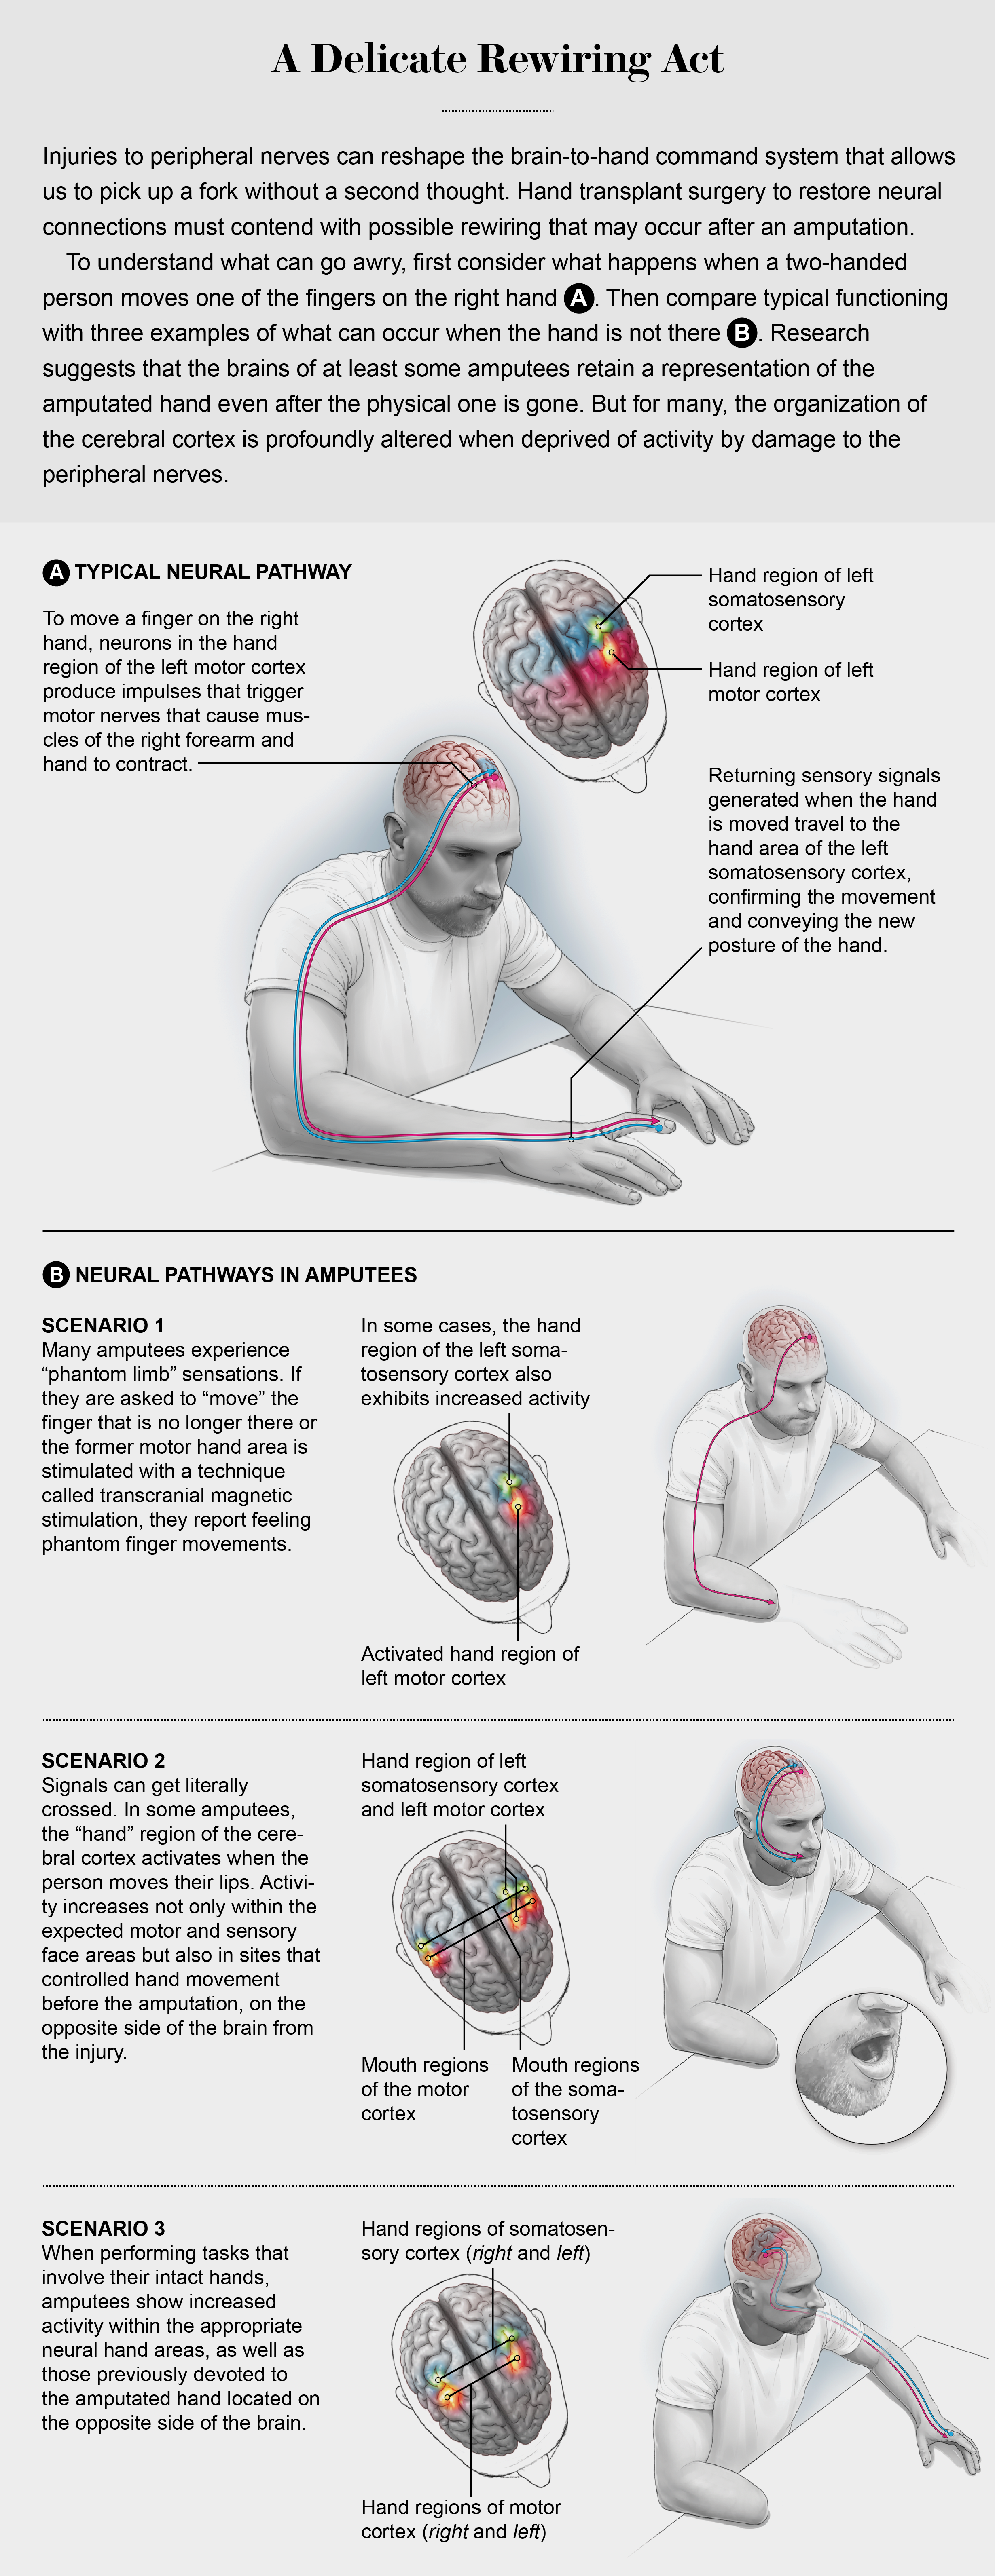 Typical neural pathways and brain regions involved in moving a finger, and 3 altered circuit scenarios that amputees may experience